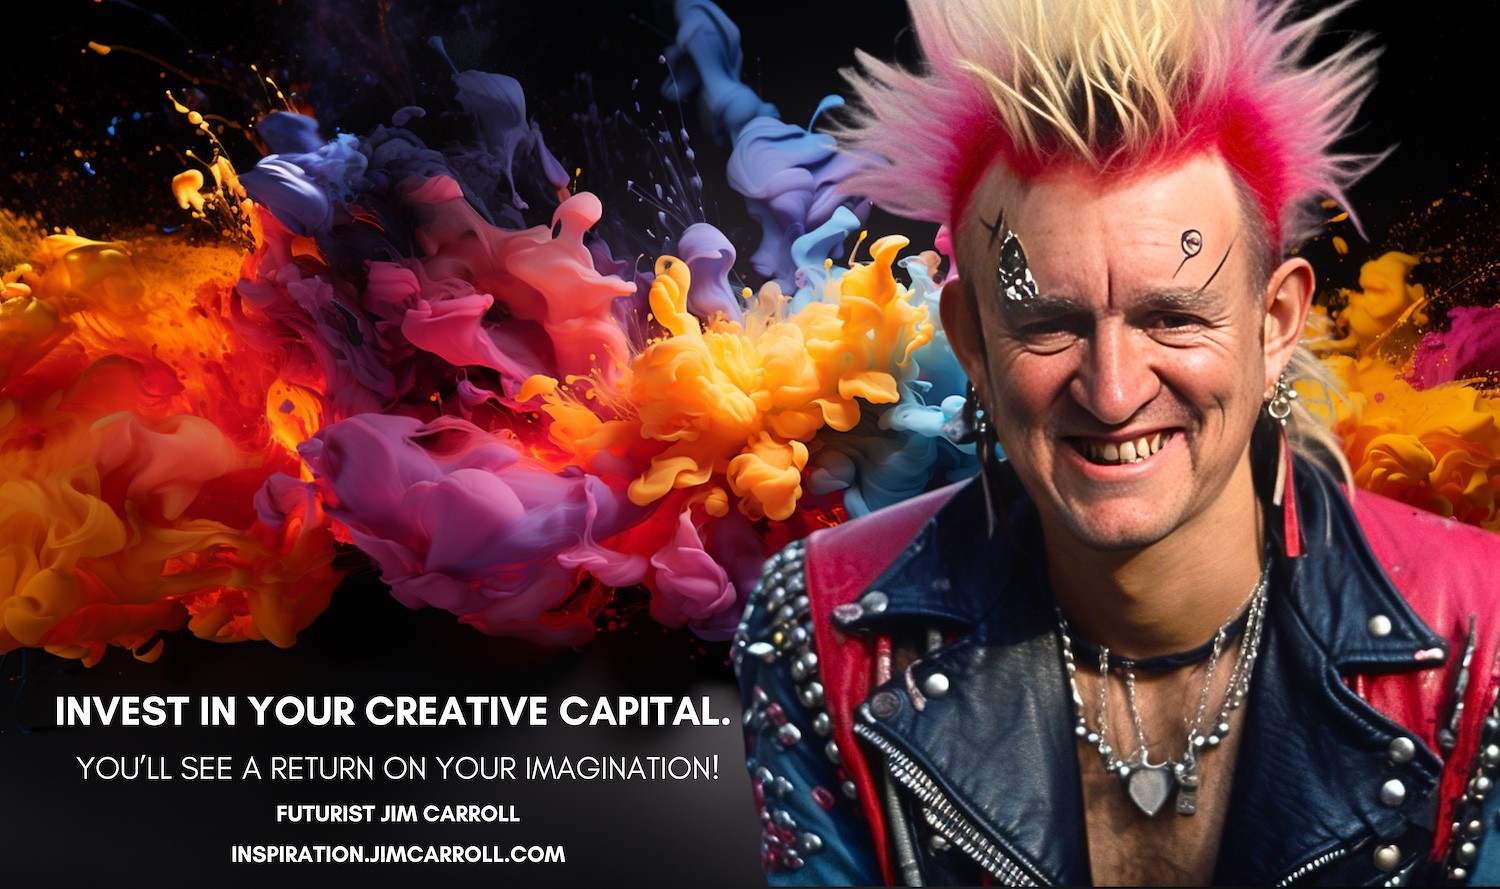 "Invest in your creative capital. You'll see a return on your imagination!" - Futurist Jim Carroll